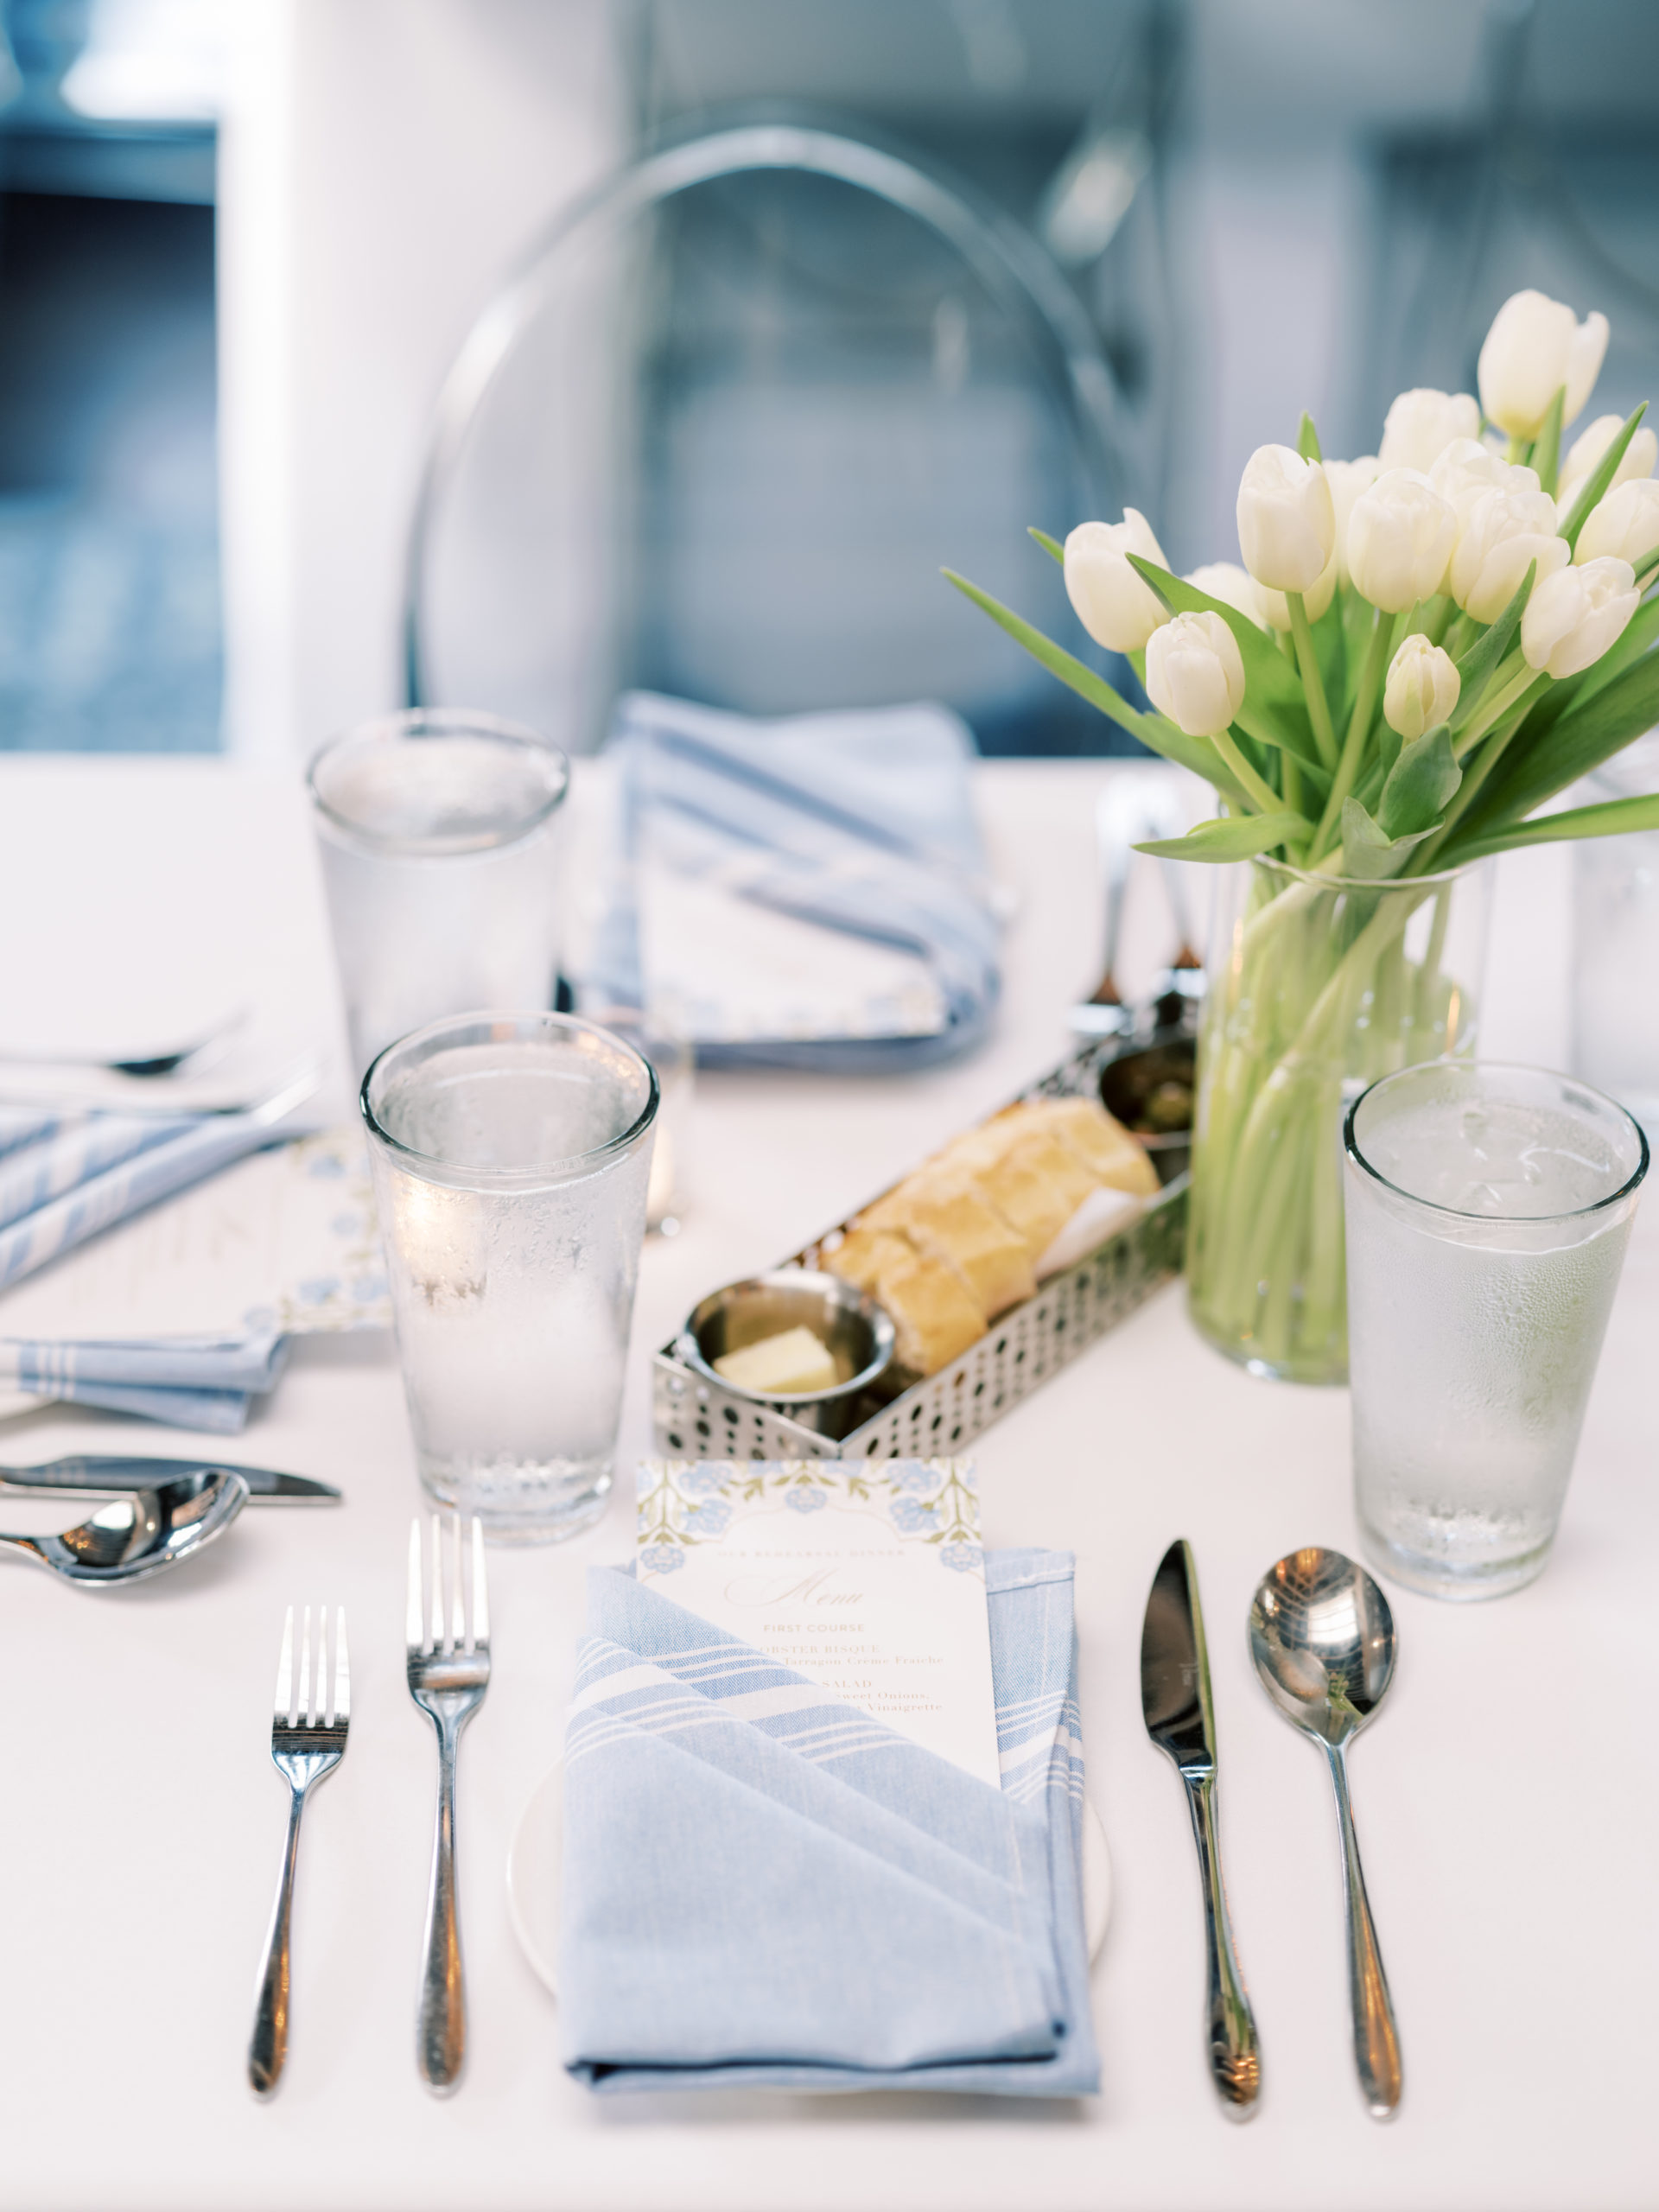 Light blue rehearsal dinner table setting with light blue linens, white tulips and blue floral menus from the knot